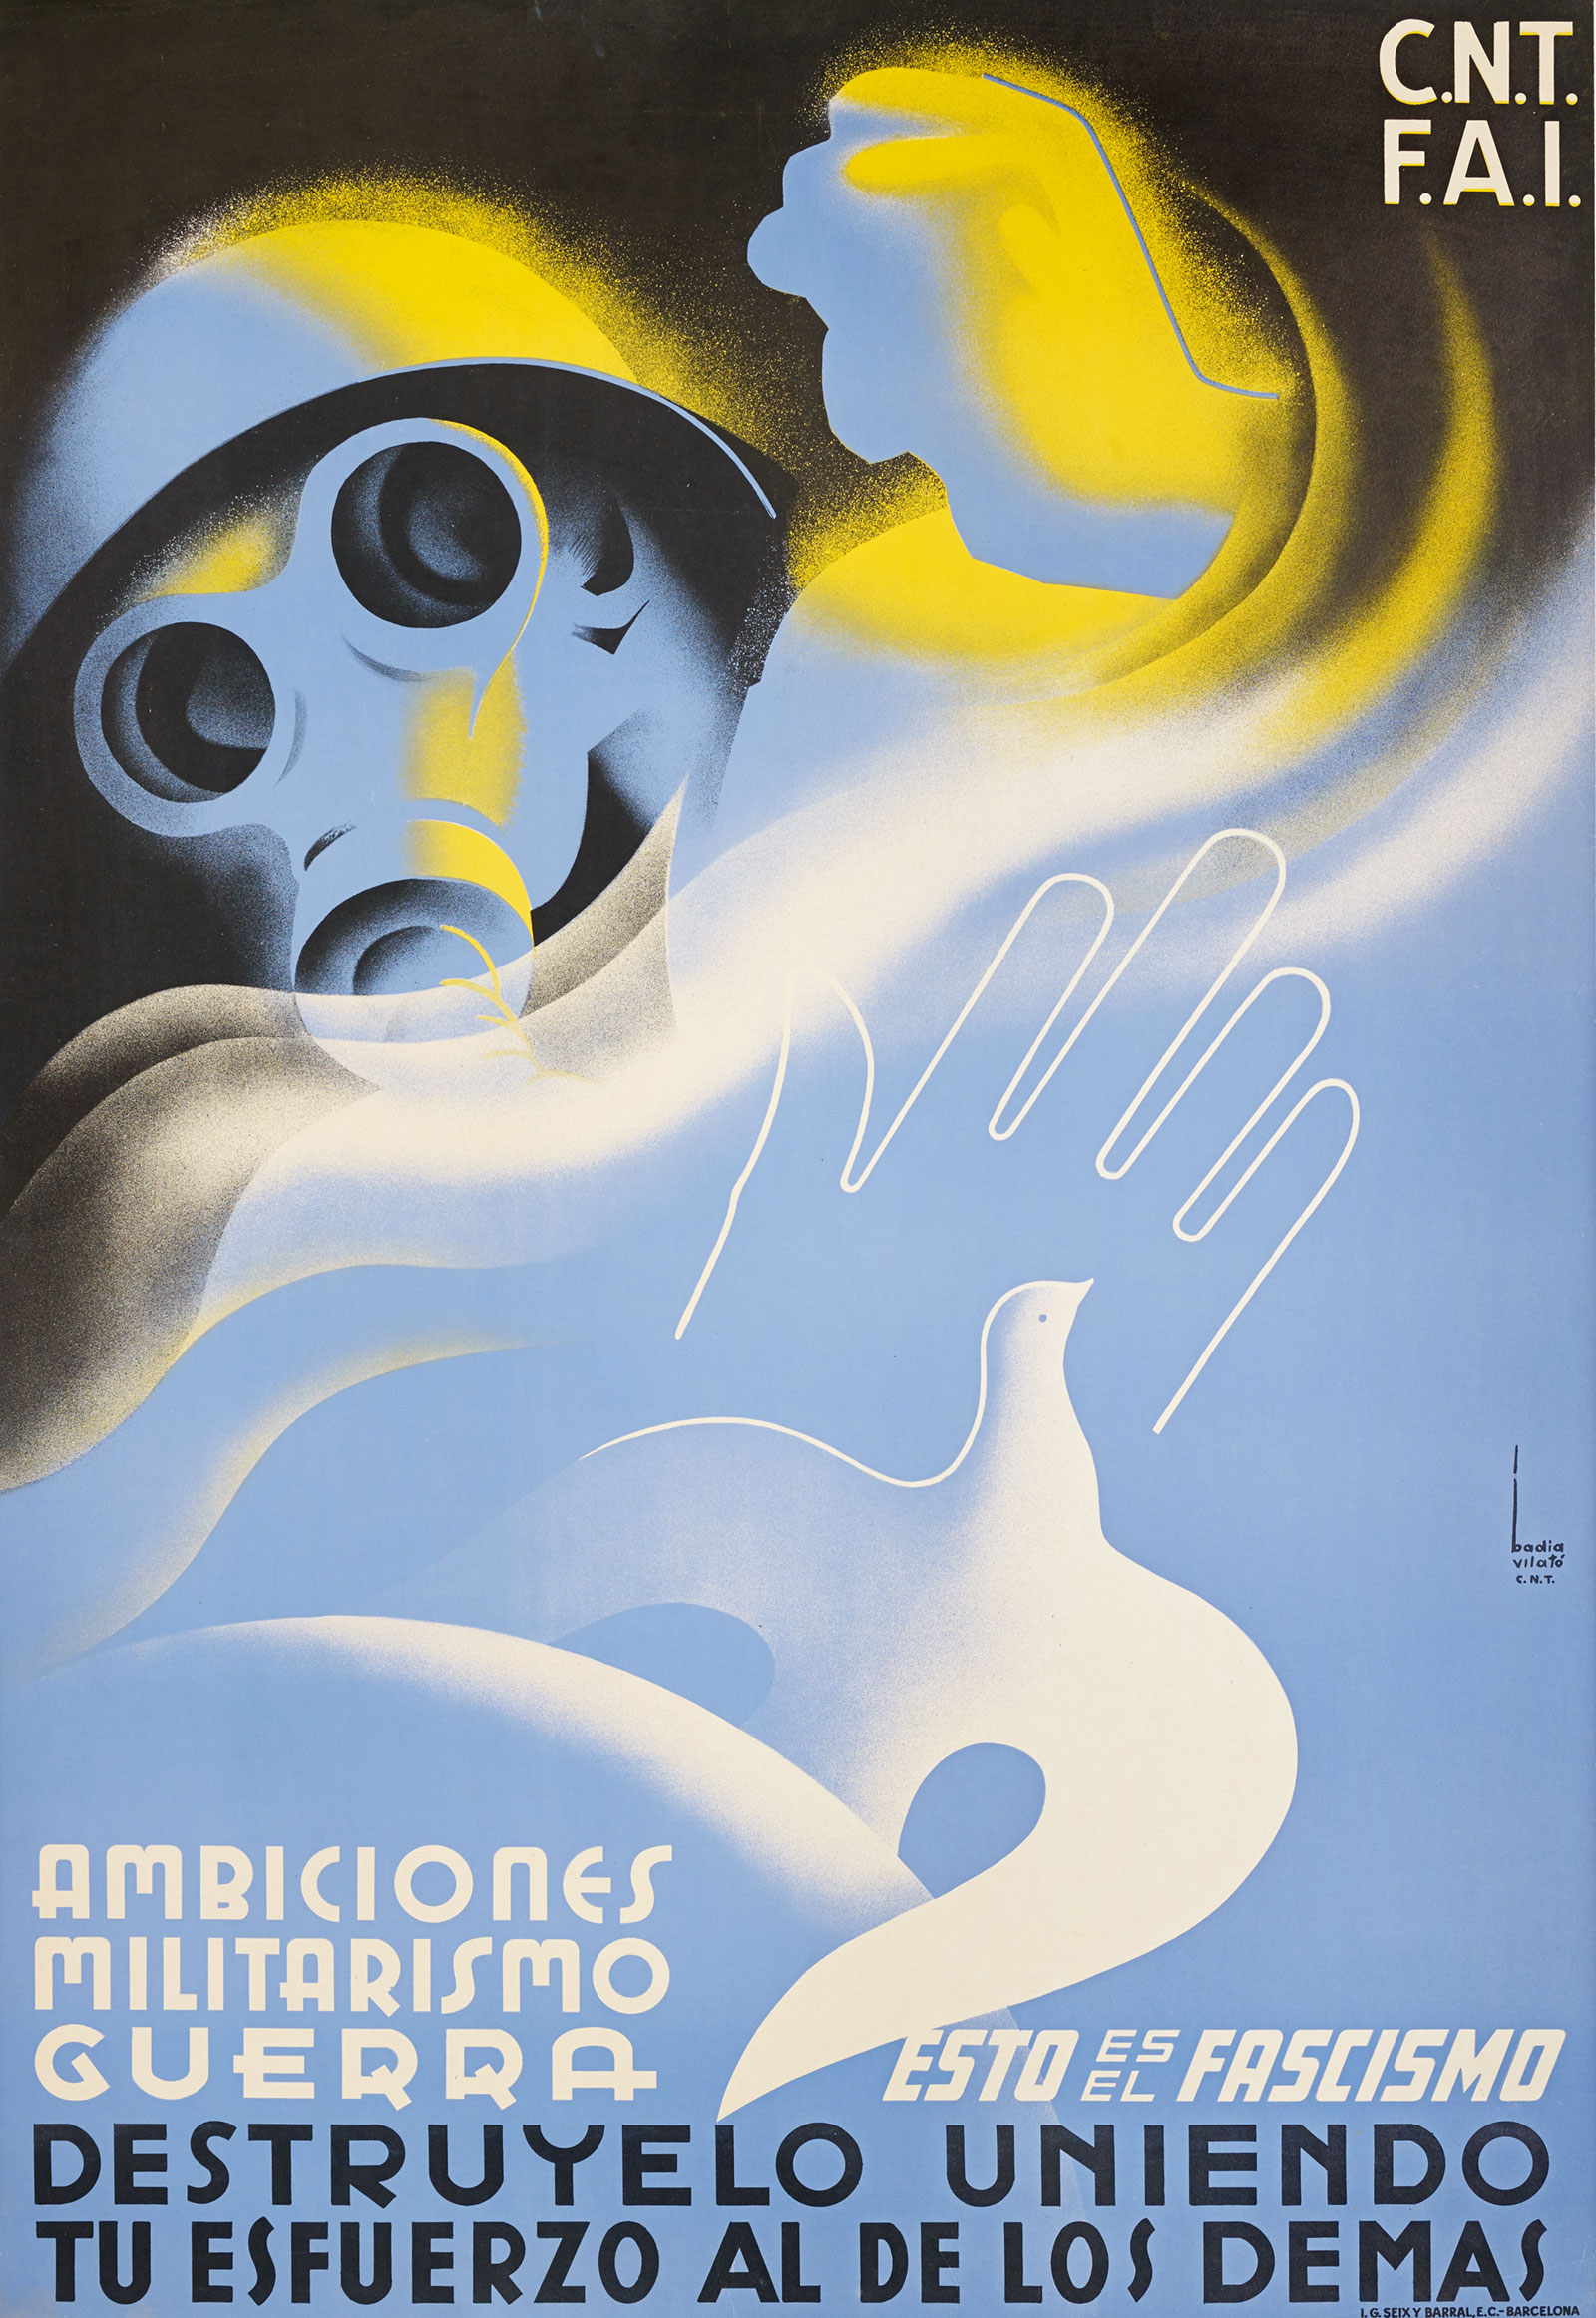 Poster juxtaposing a masked face and dove of peace